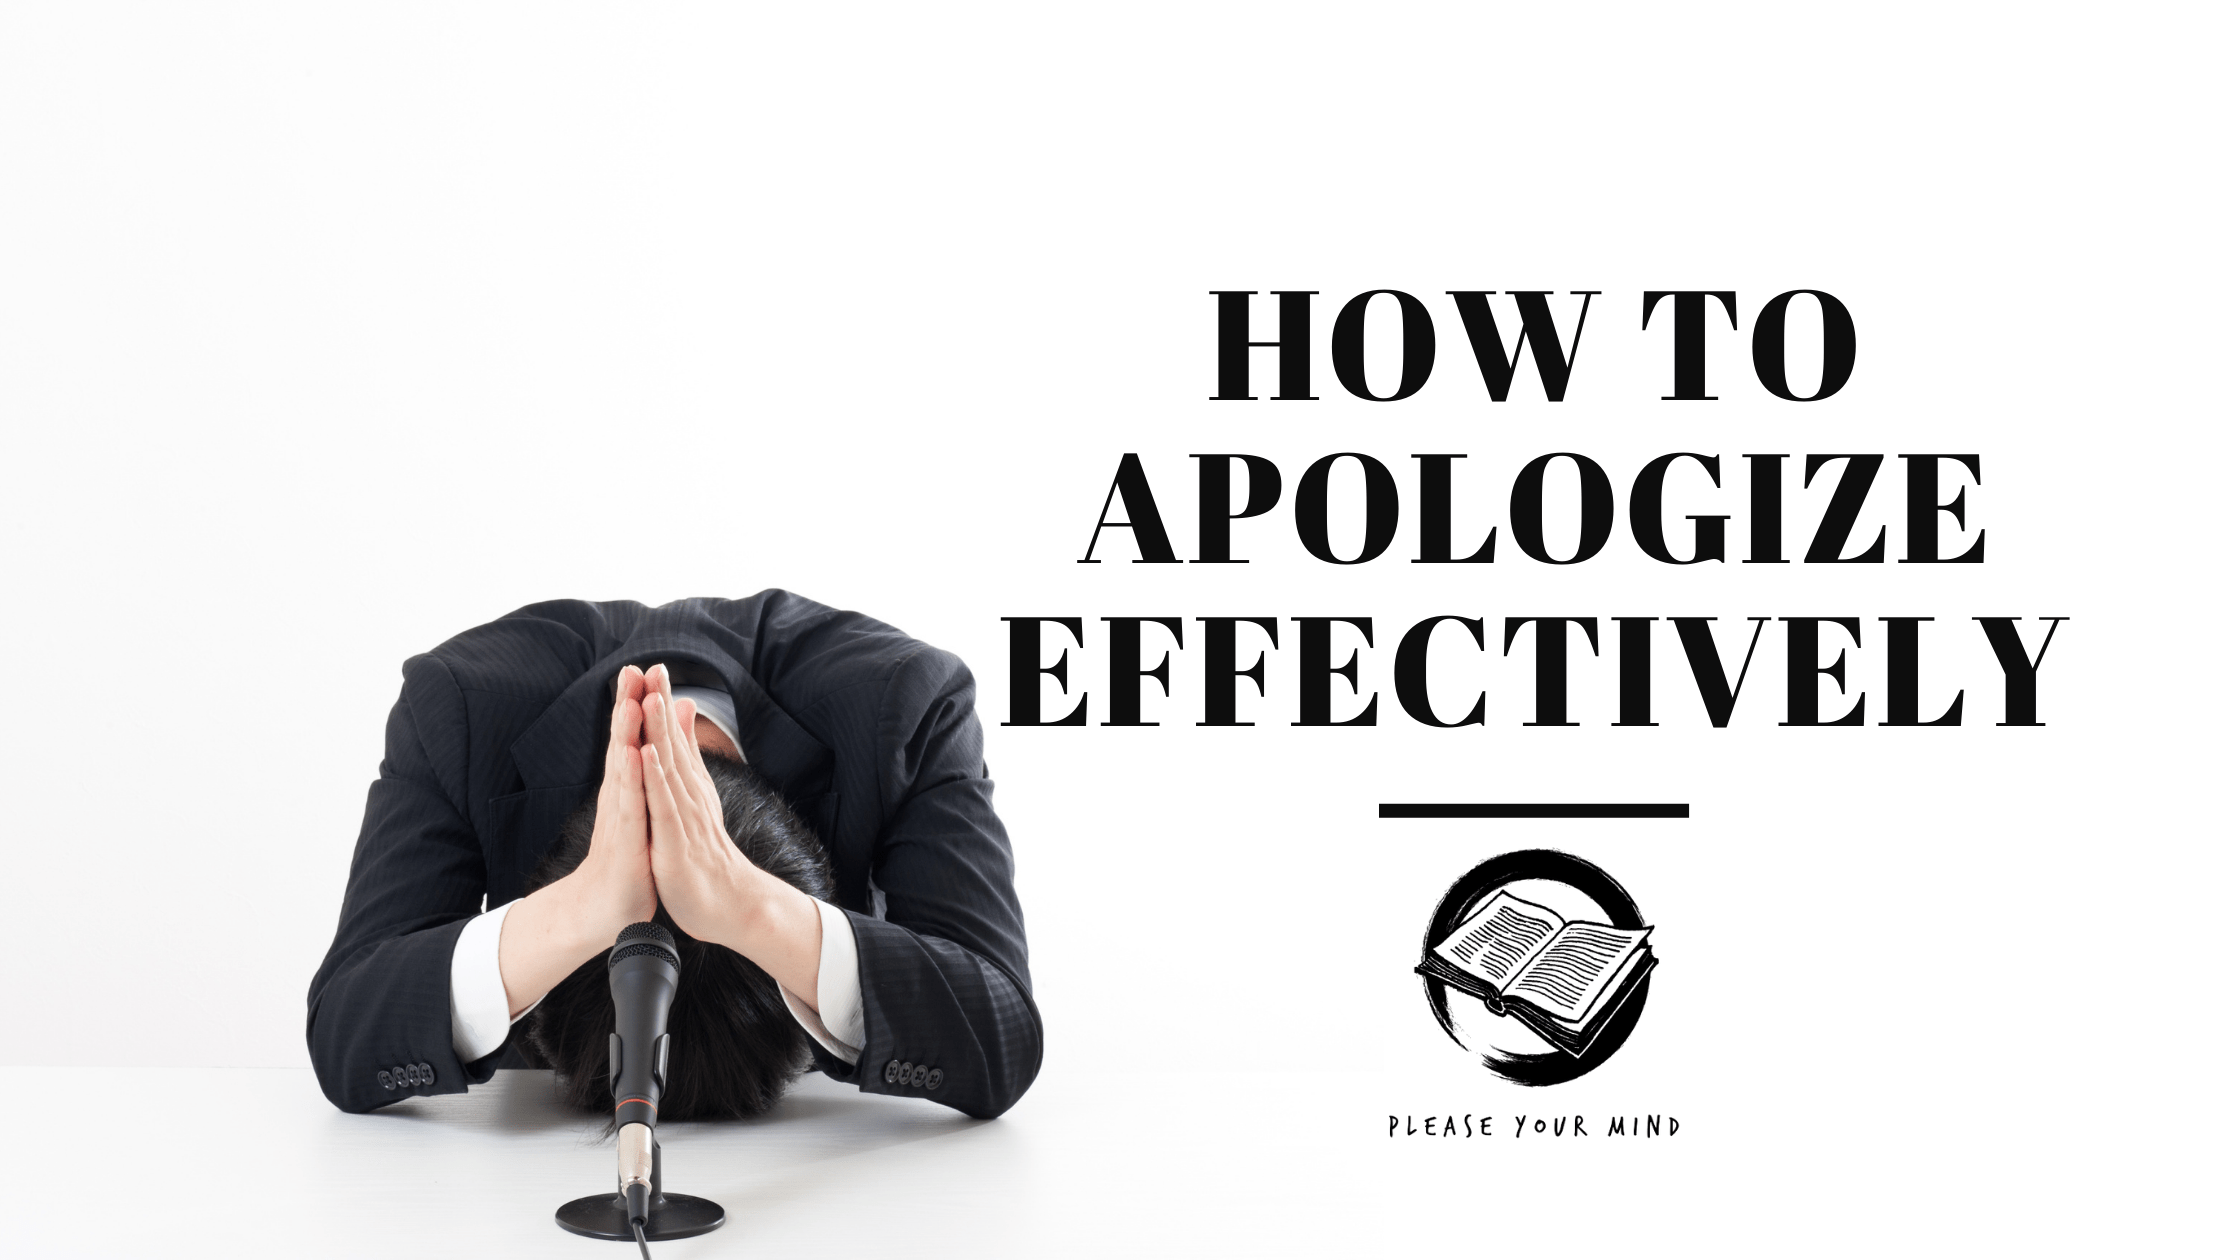 You should apologize